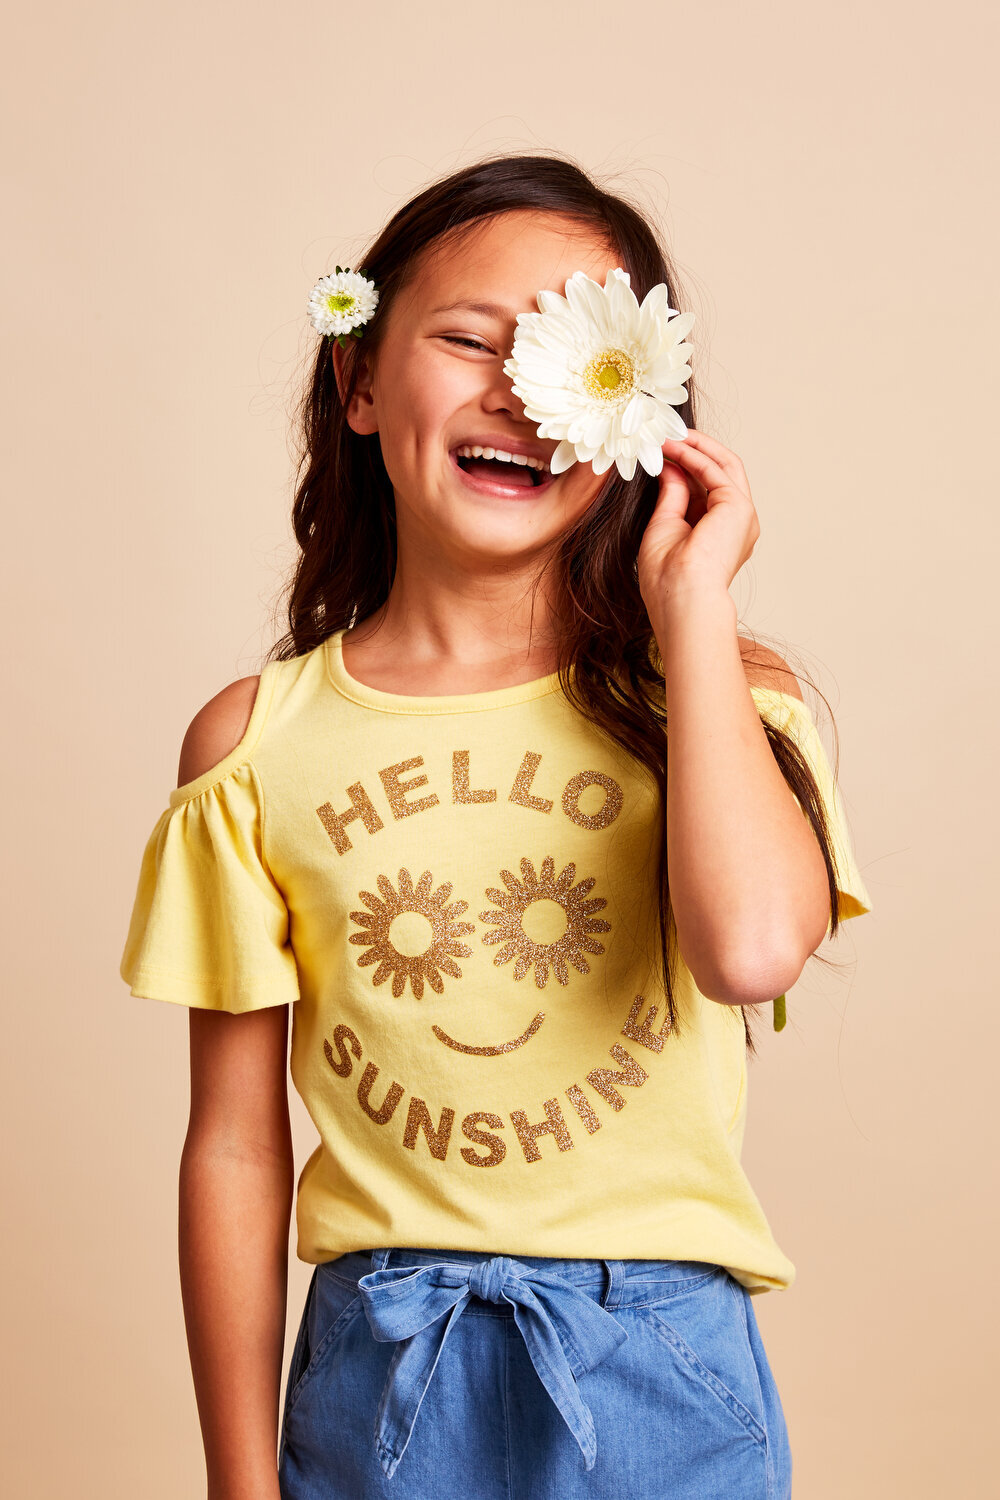 Greer Rivera Photography Kids Editorial Photoshoots Marin CA  Girl with "hello sunshine" t-shirt holding a flower in front of her eye